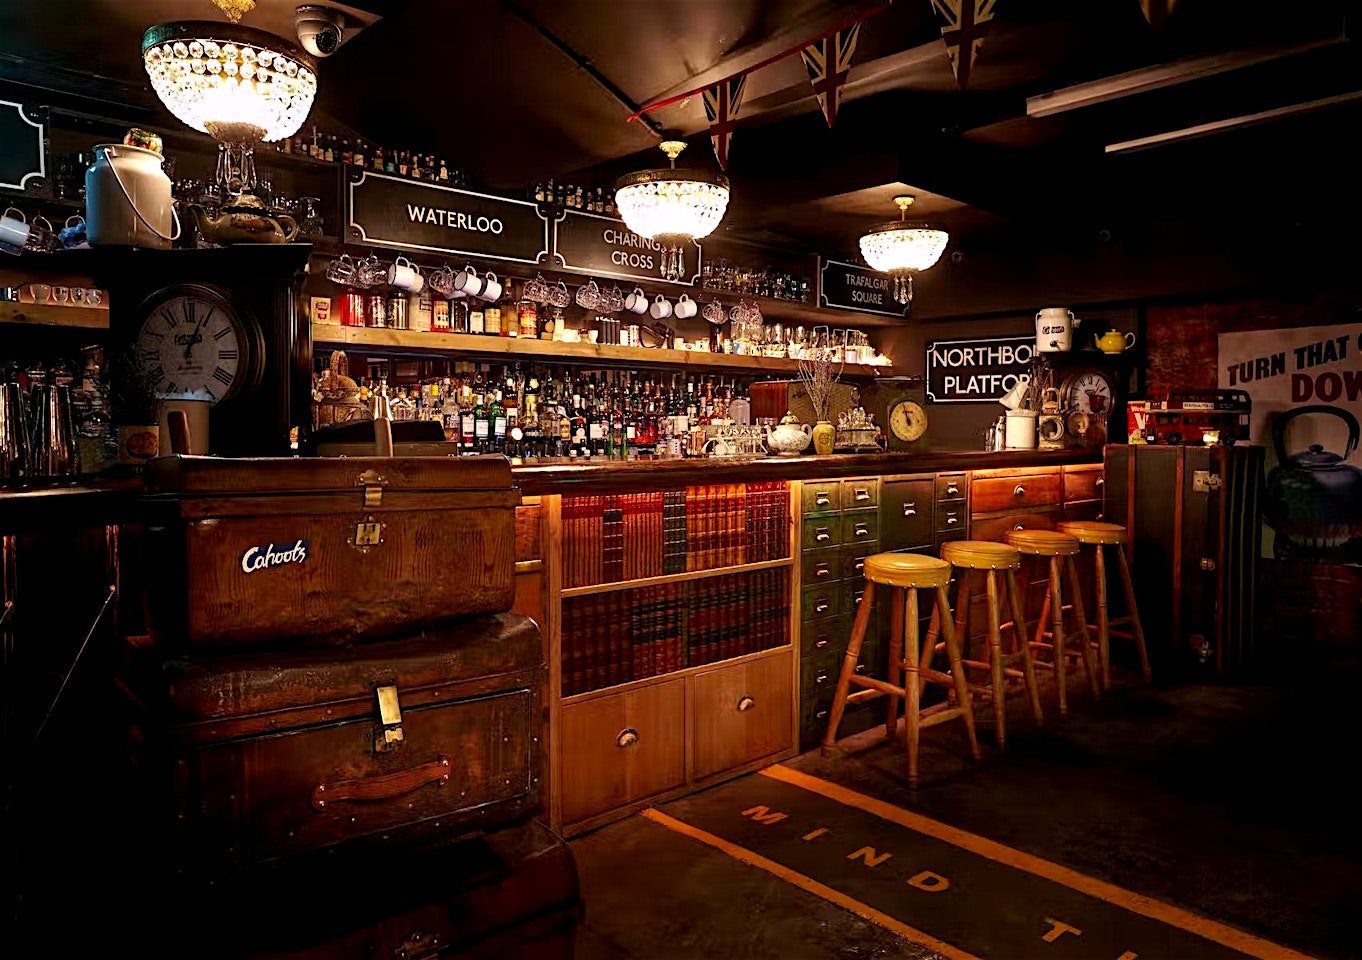 The bar at Cahoots, an underground drinking den in the Soho district of London, available for hire